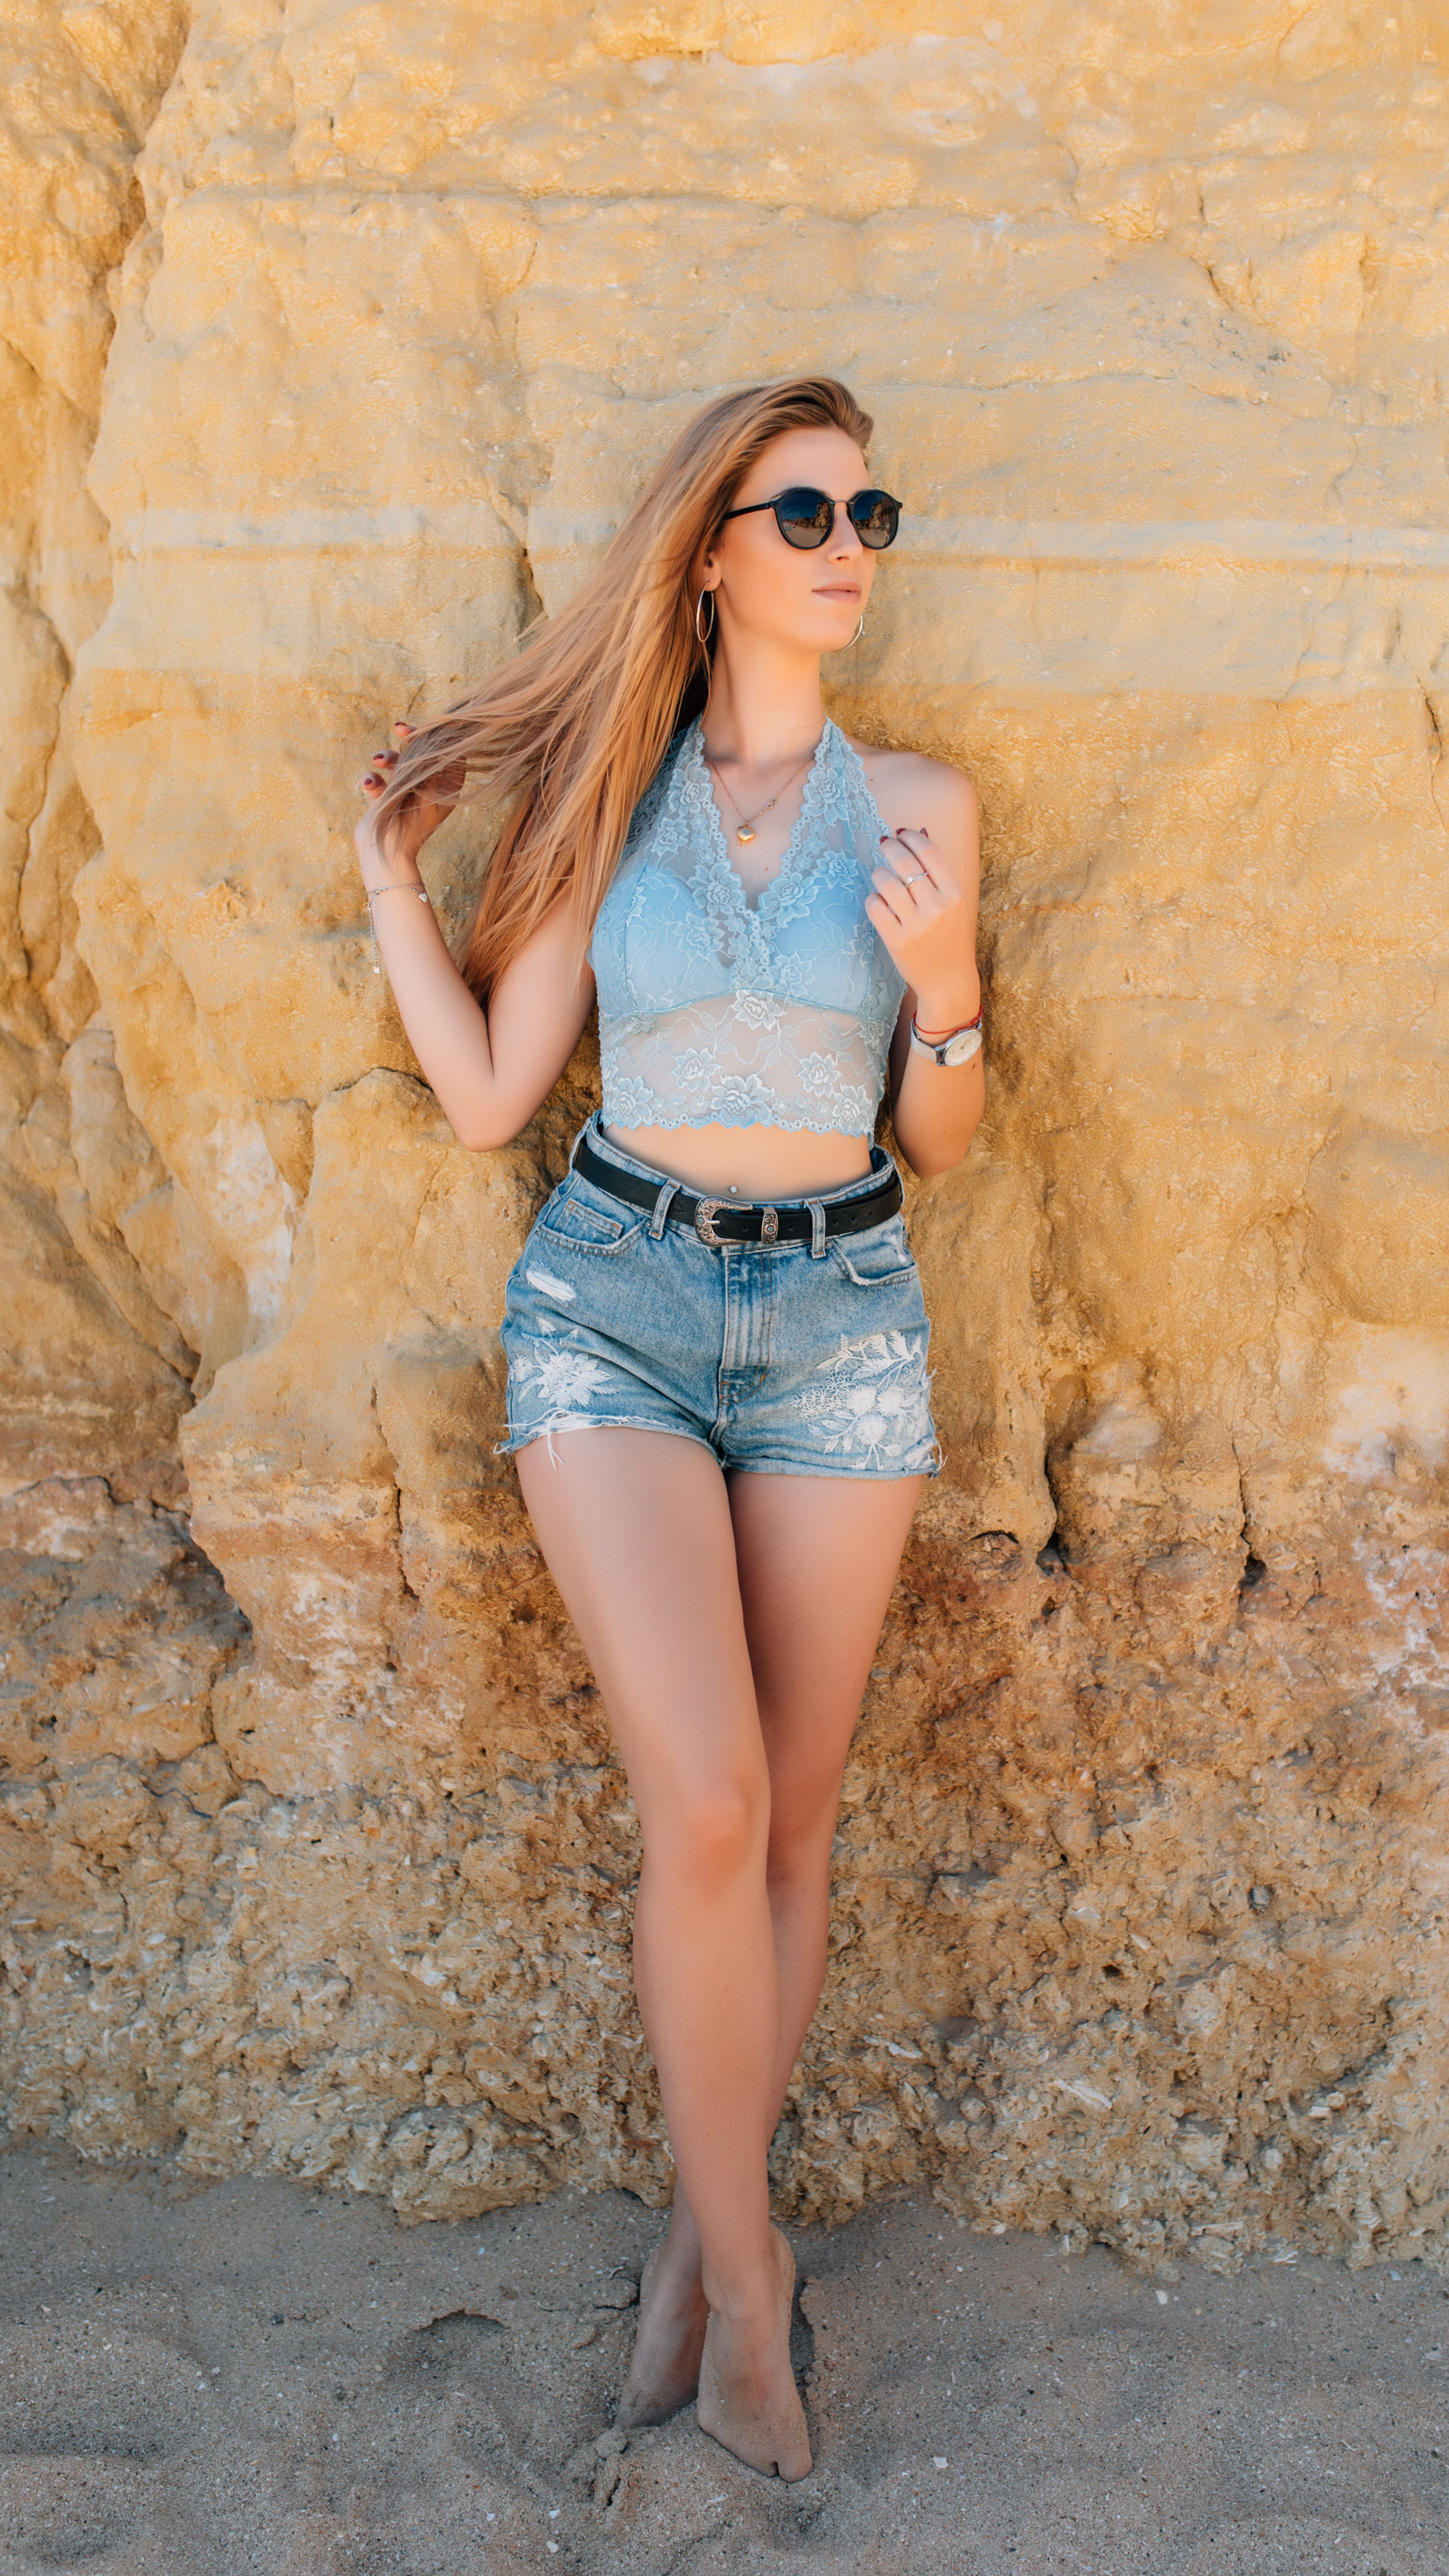 People 2516x4473 model women women with shades sand barefoot looking away long hair wristwatch standing outdoors women outdoors sunglasses legs pointed toes